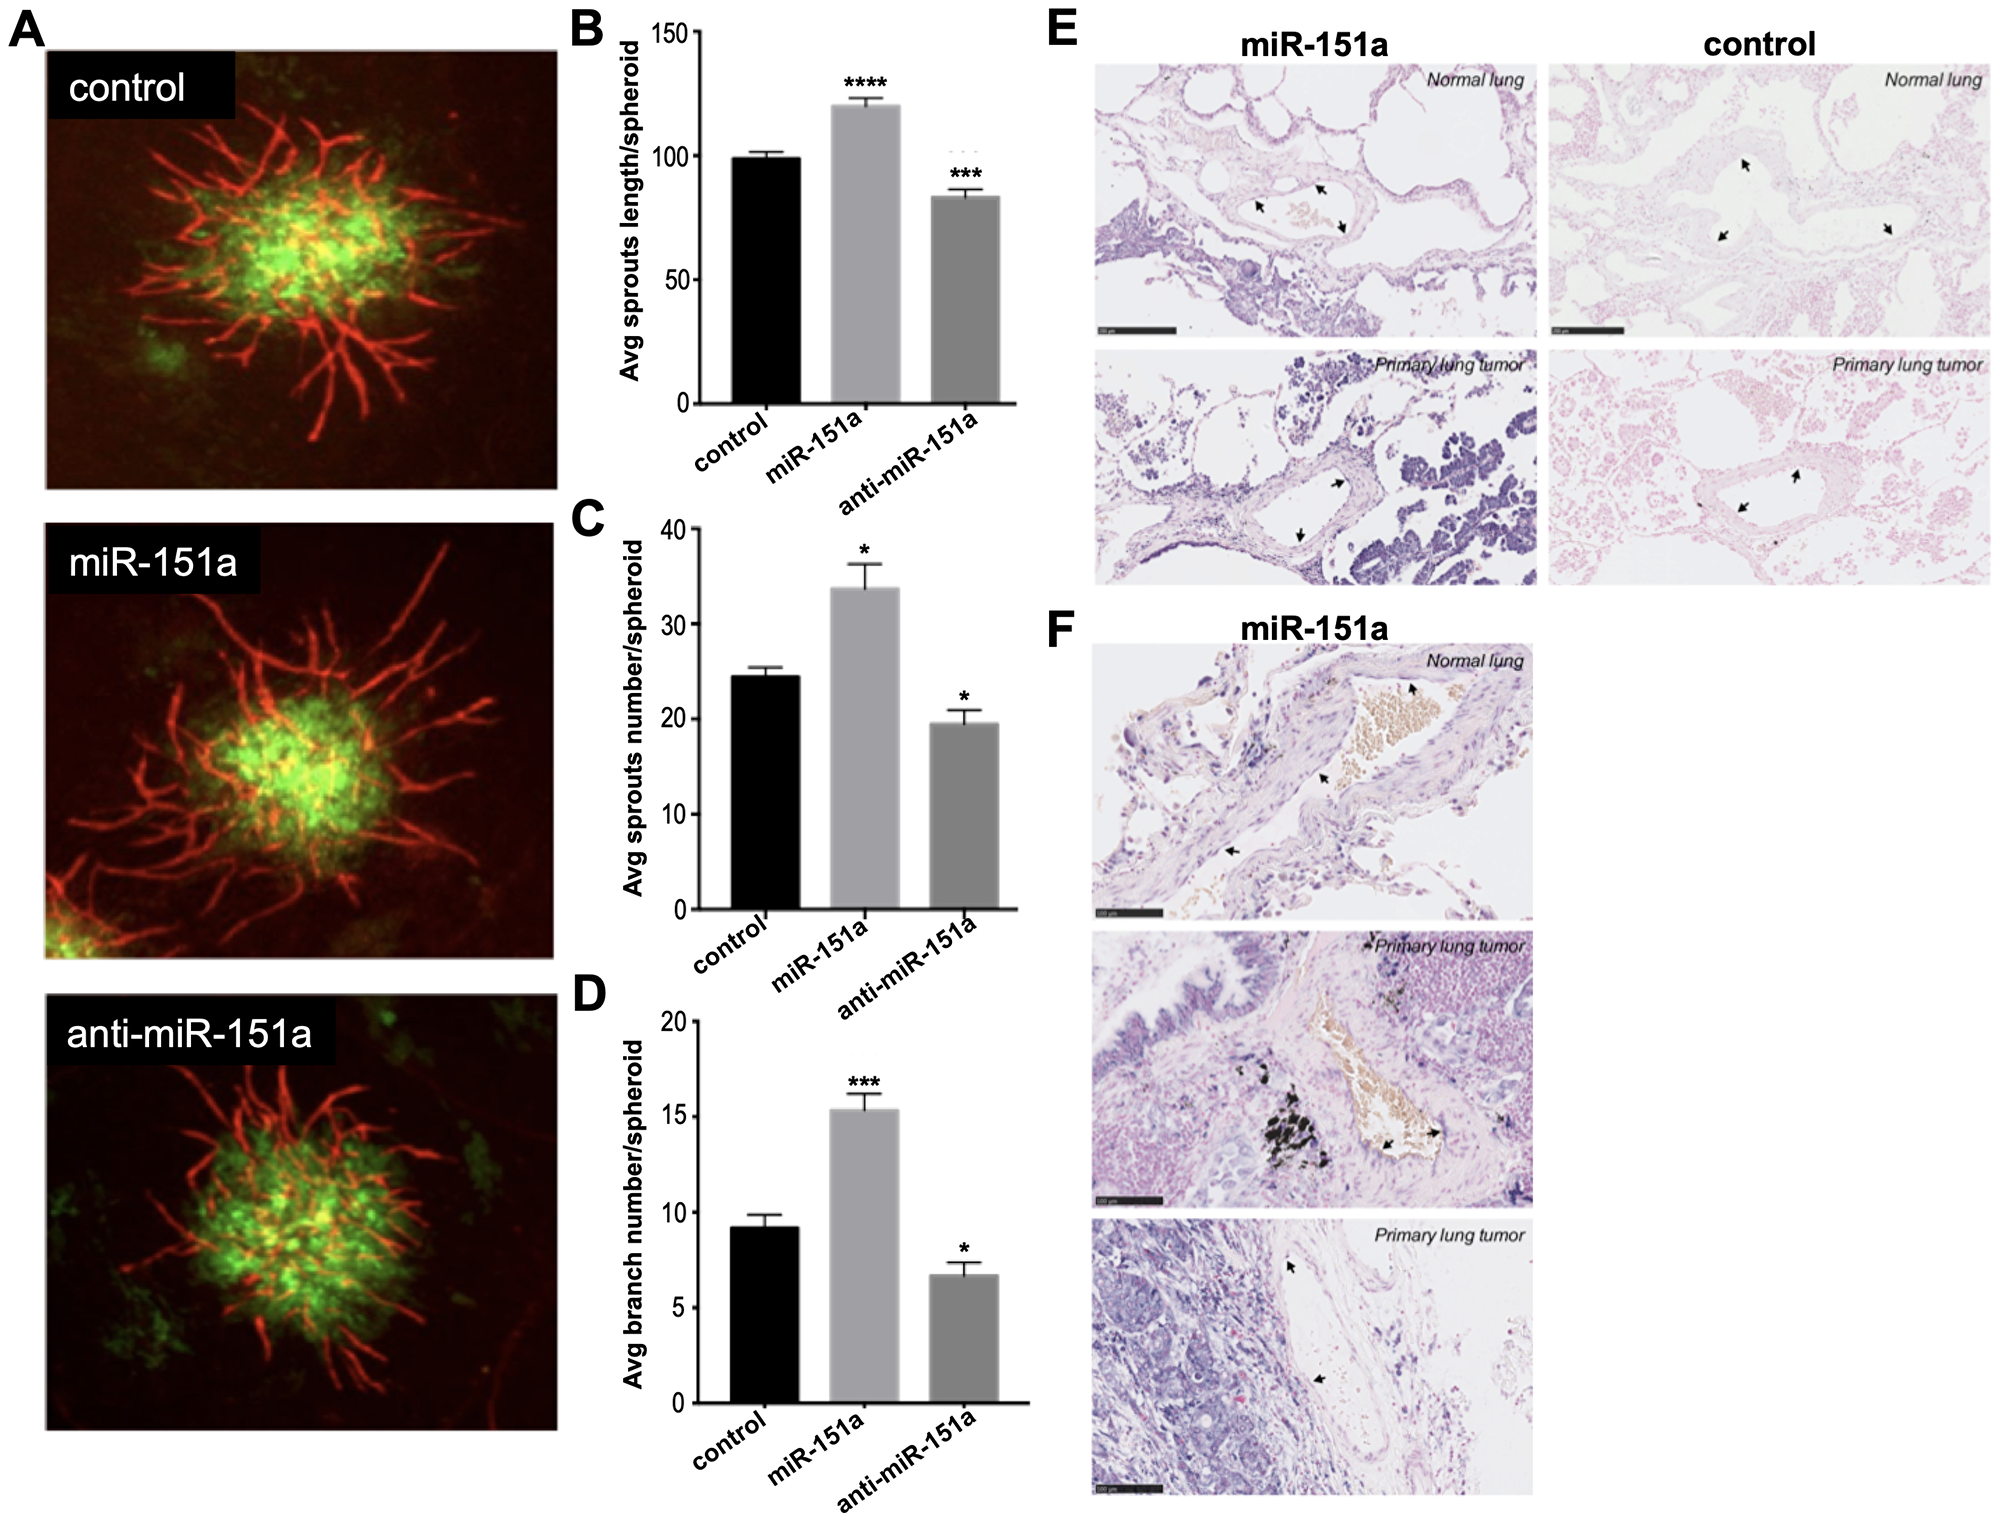 miR-151a enhances angiogenesis in 3D vascularized lung tumor spheroids and is expressed in vasculature of NSCLC patient specimens.